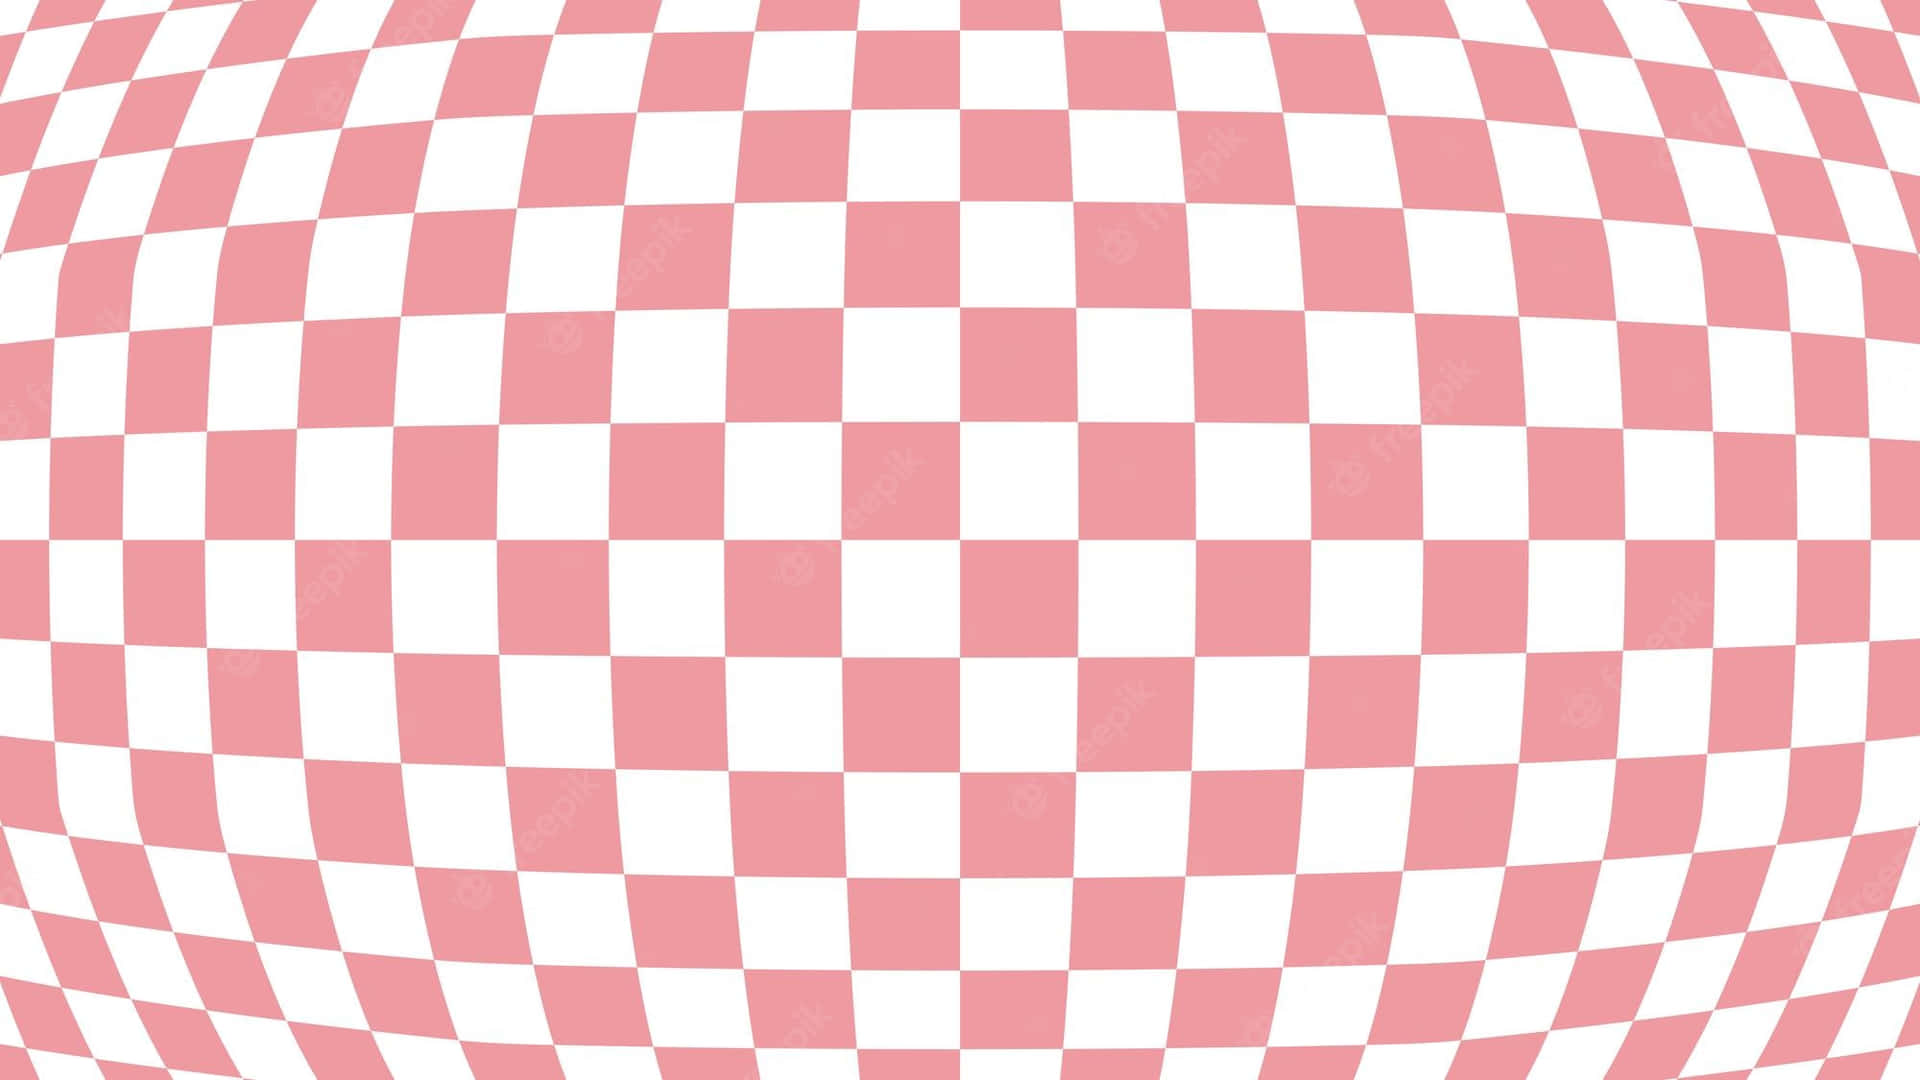 Download A Pink And White Checkered Background Wallpaper 